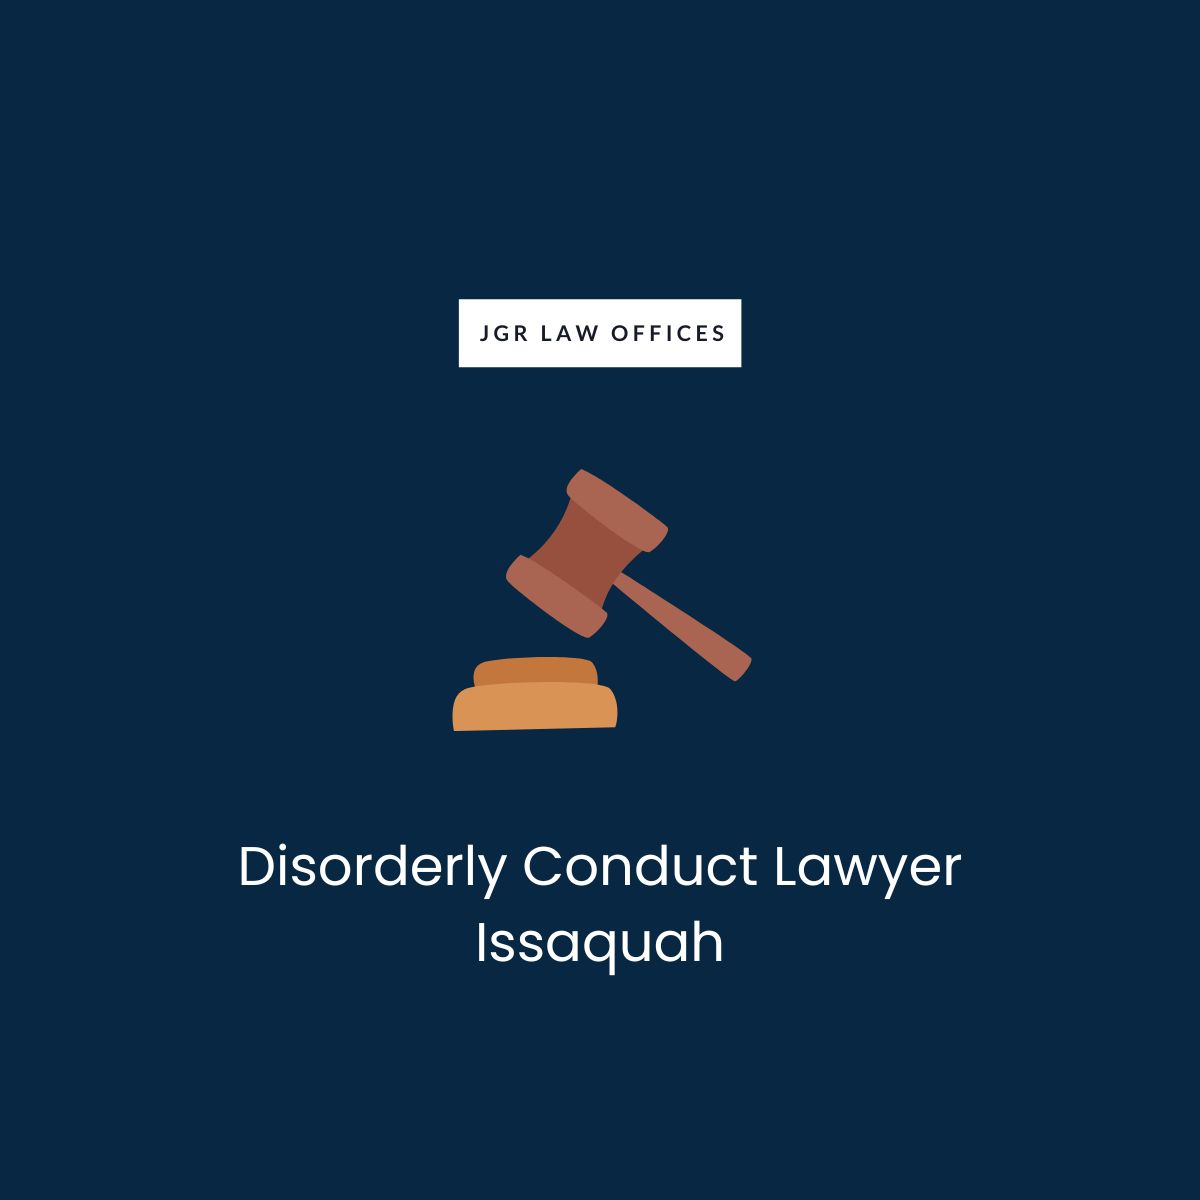 Disorderly Conduct Lawyer Issaquah Disorderly Conduct Disorderly Conduct